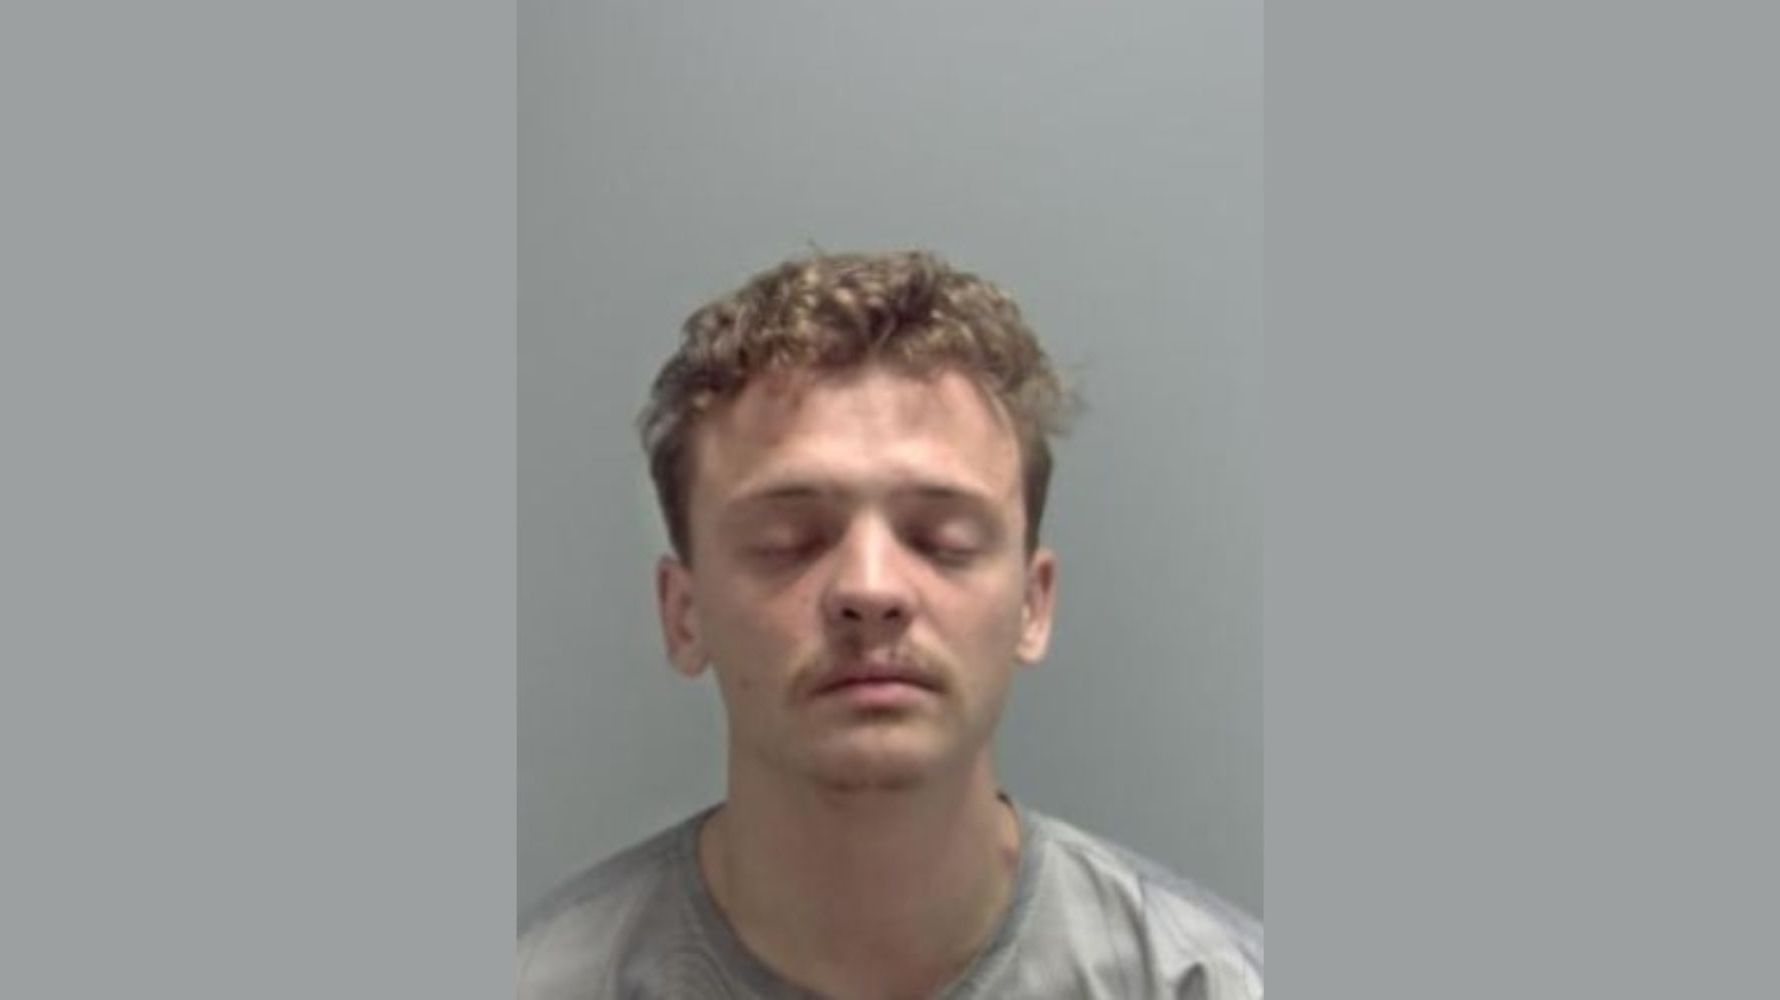 Norfolk man jailed for 7 year for serious sexual assault | News ...